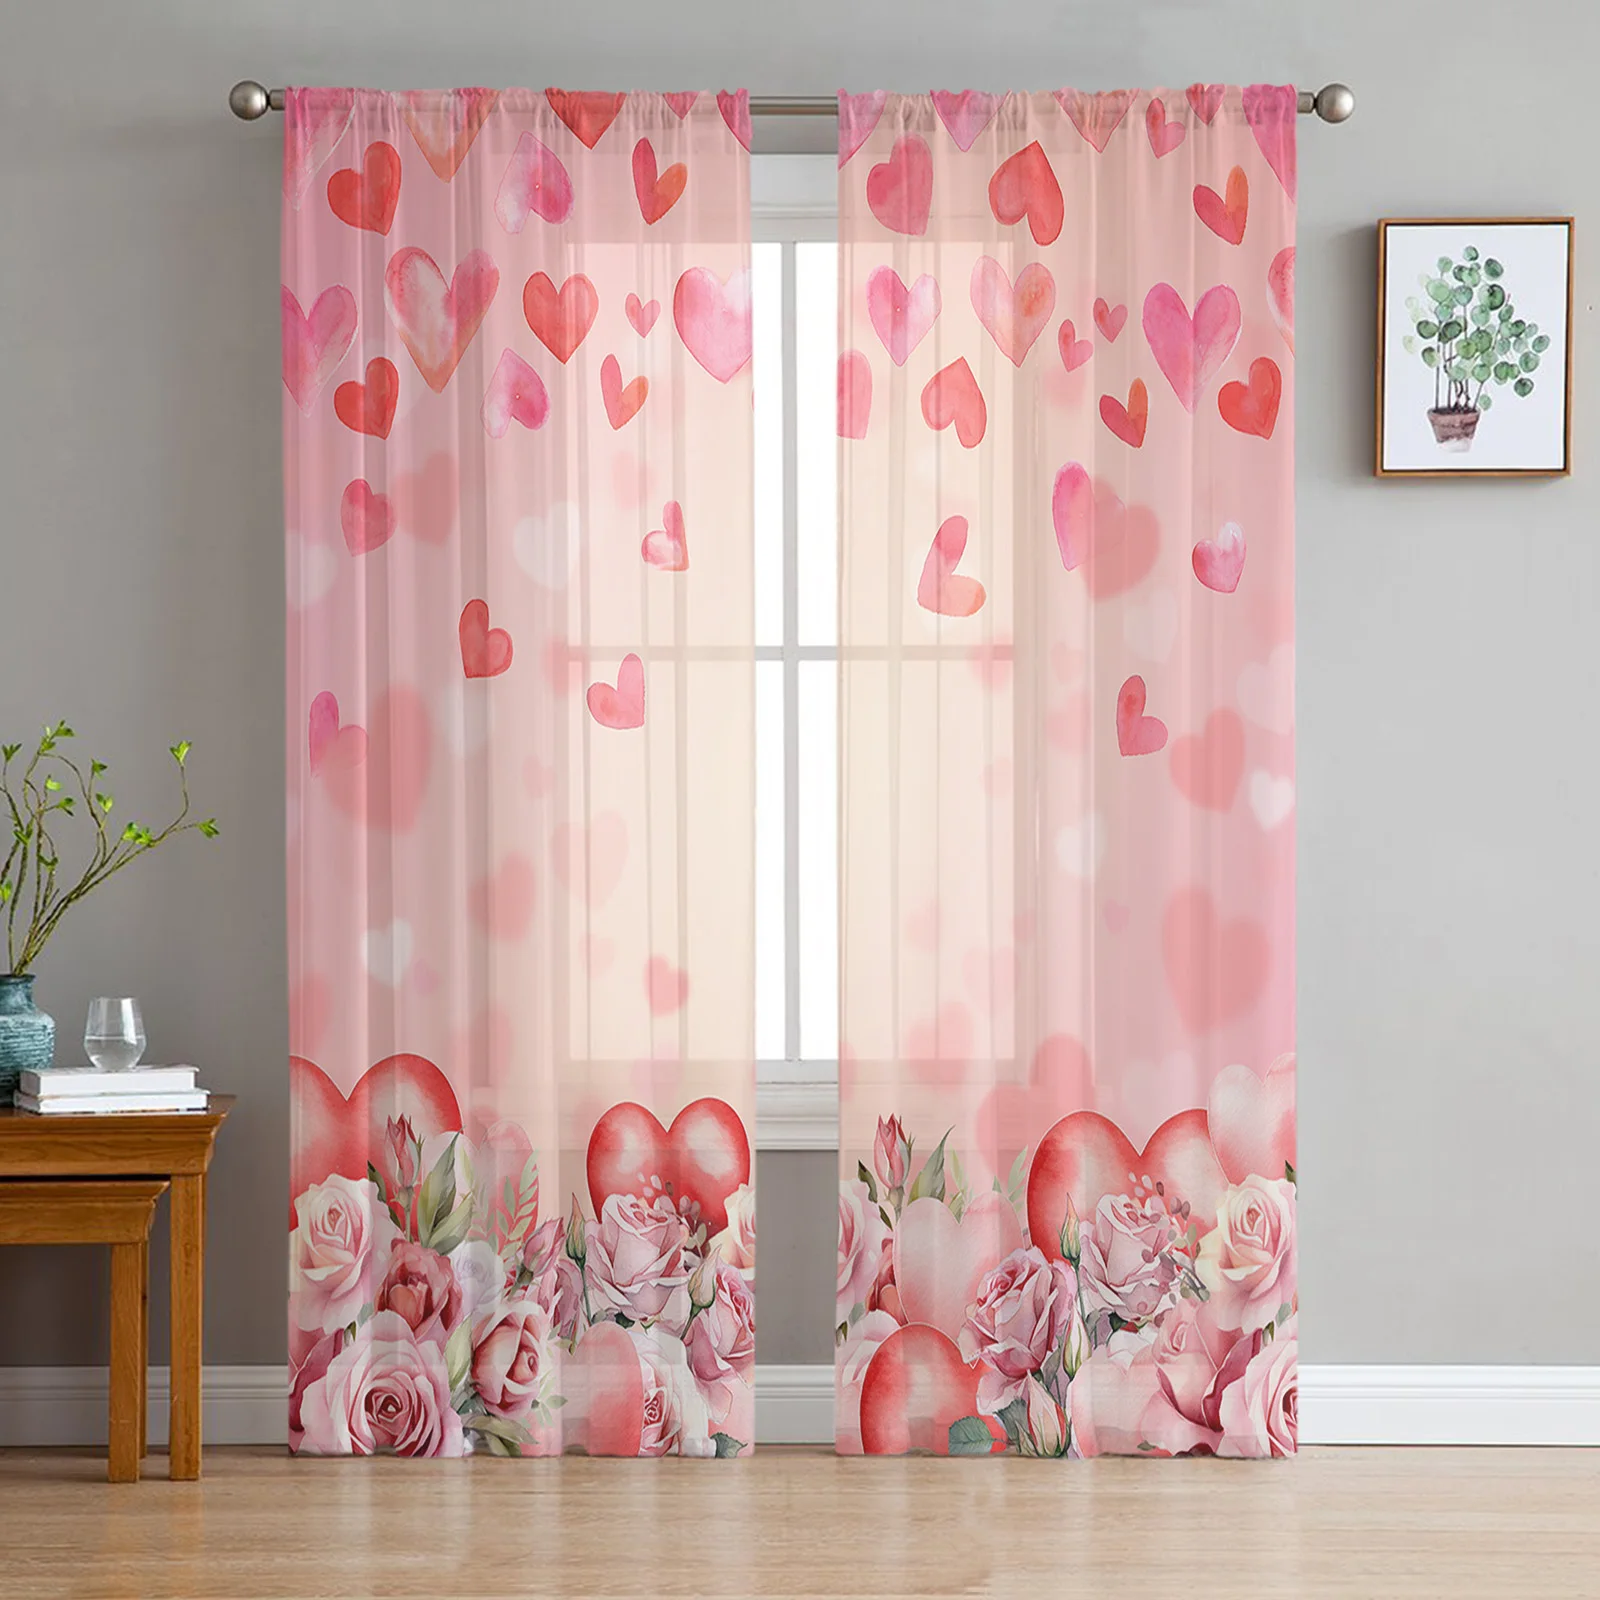 

Valentine'S Day Roses Love Sheer Curtains for Bedroom Living Room Decoration Window Curtain Kitchen Tulle Voile Organza Drapes